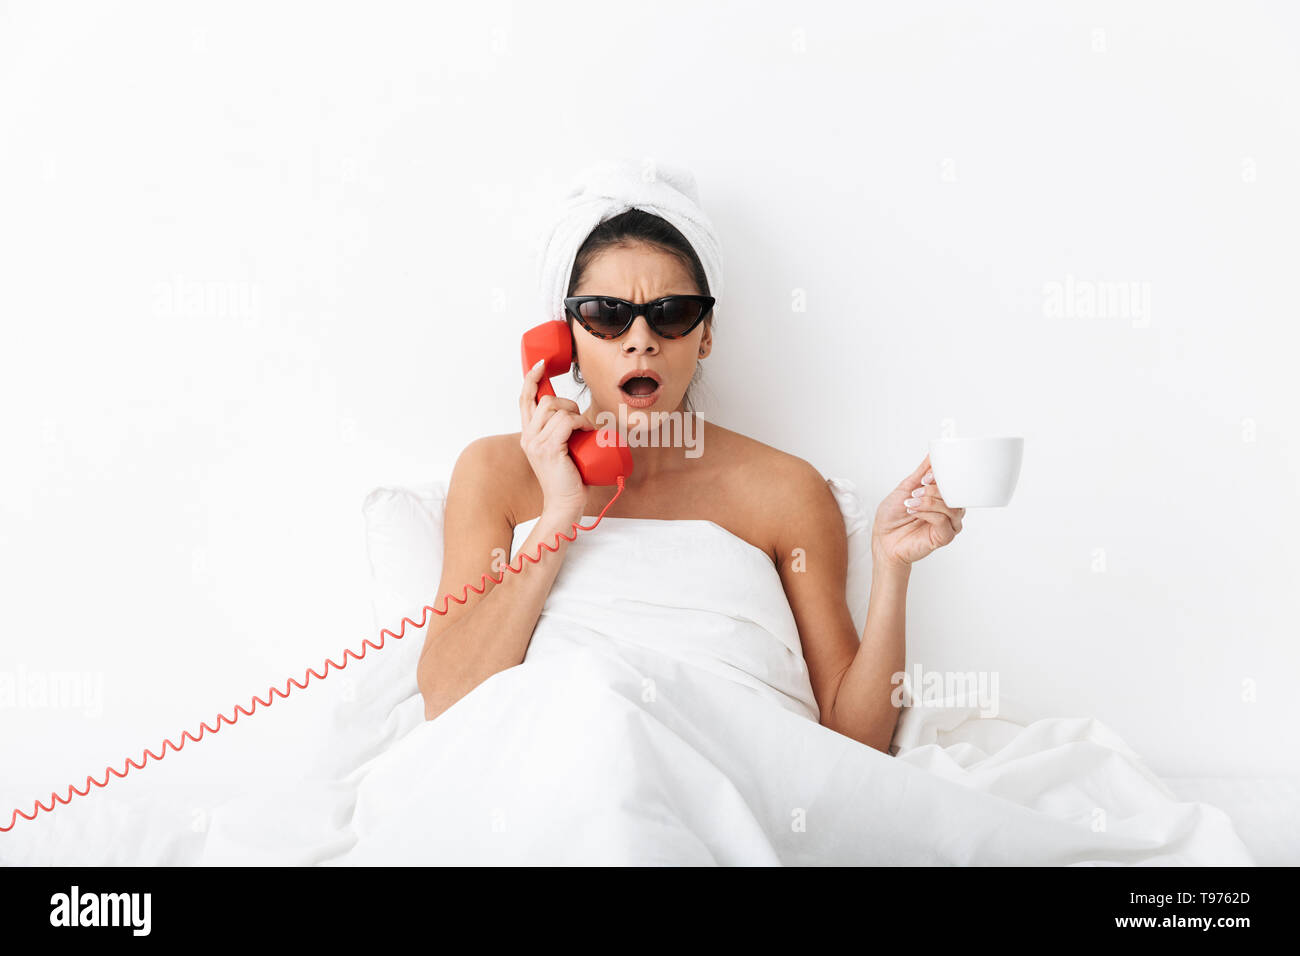 Upset young woman sitting in bed after shower wrapped in blanket, wearing sunglasses, talking on a landline phone, holding a cup Stock Photo